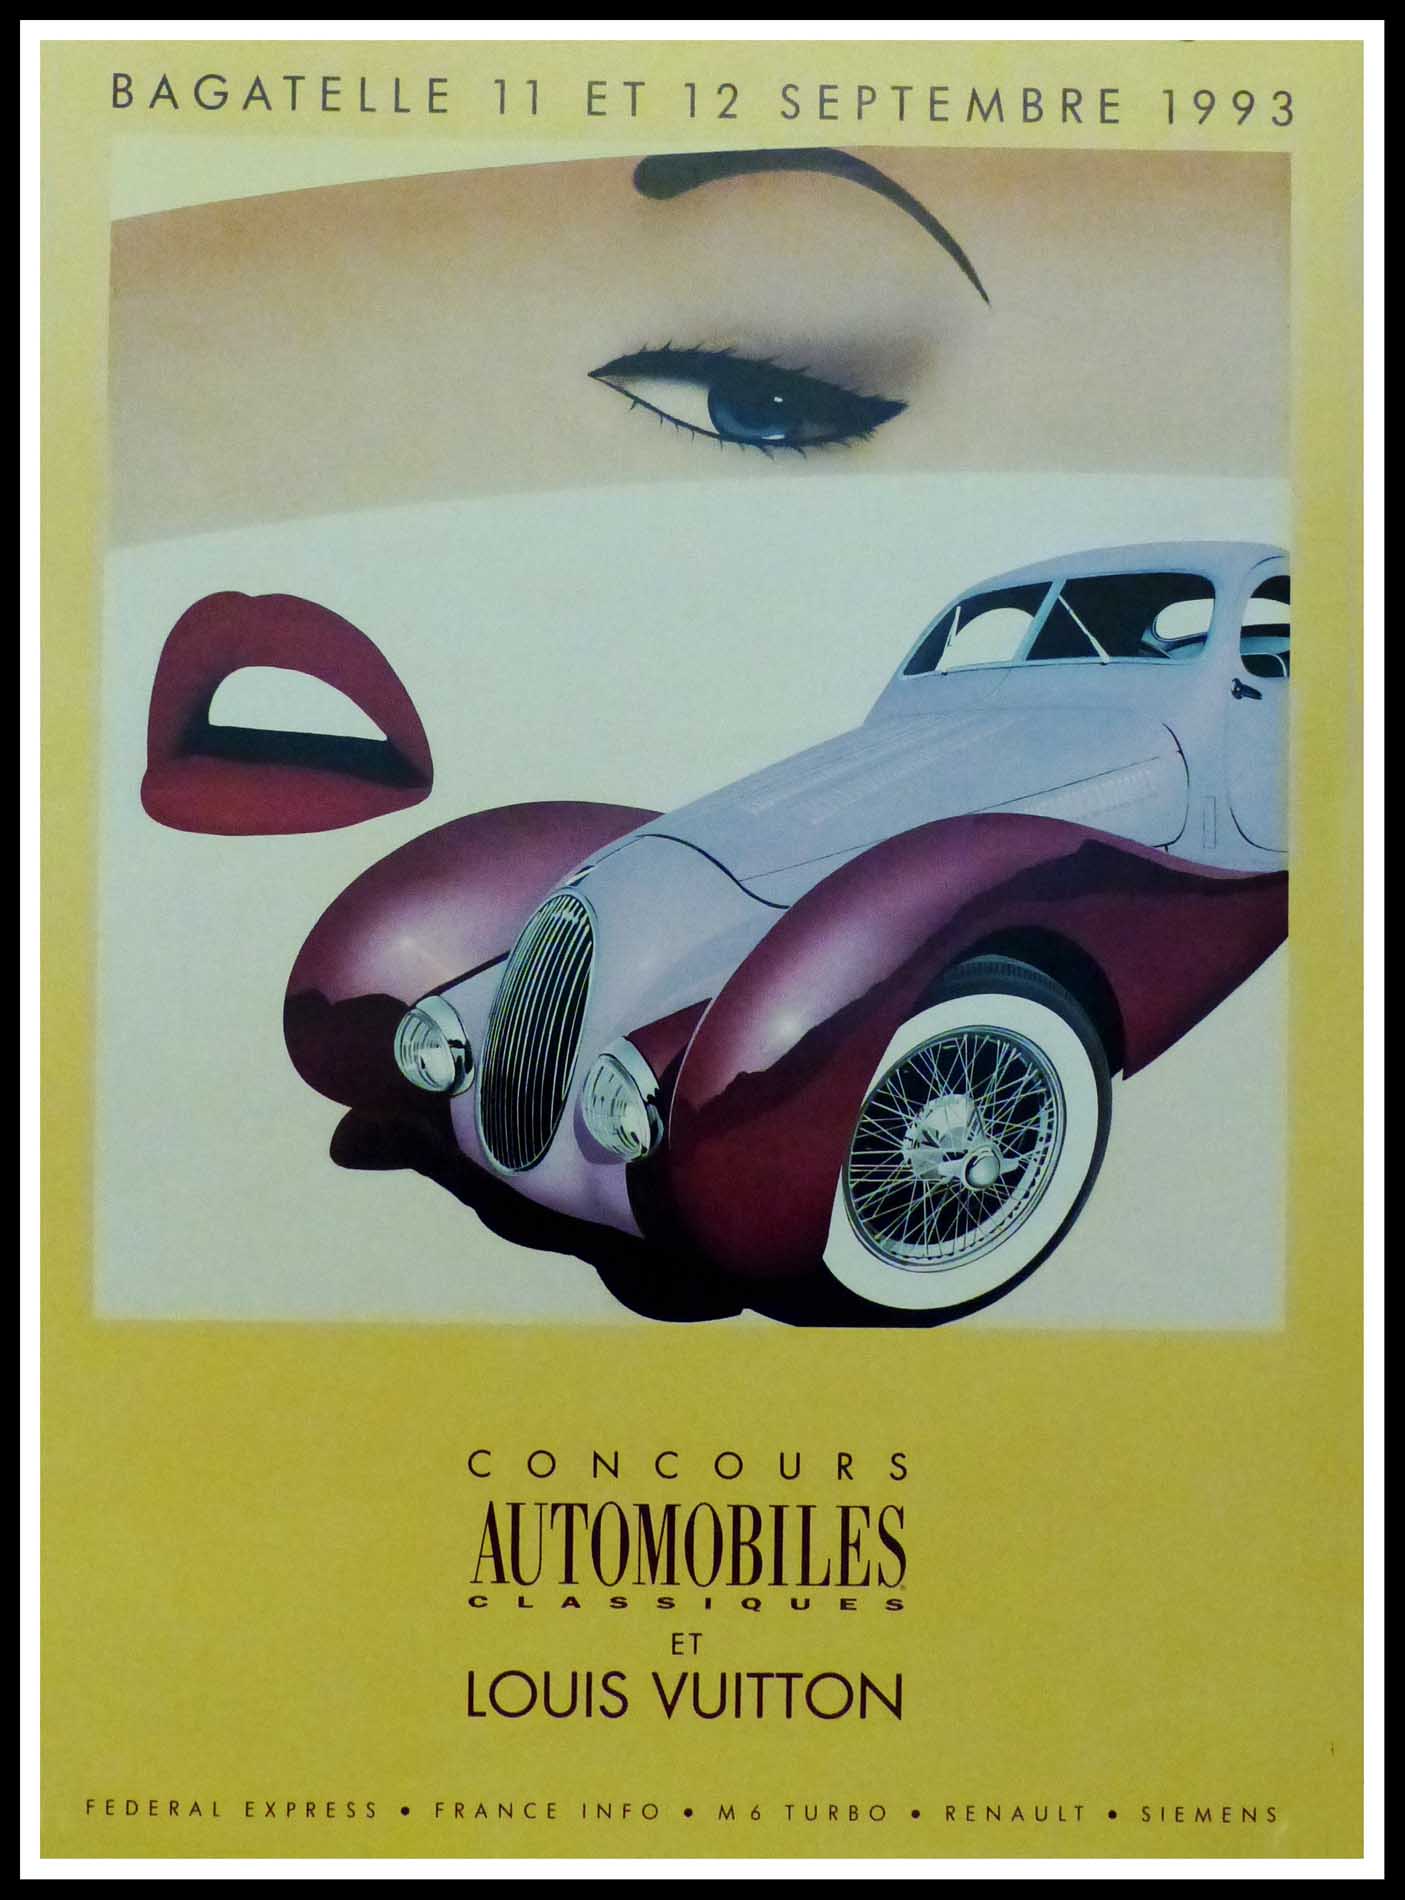 (alt="Original vintage poster Classic Car Contest with Louis Vuitton, 1993 realised by Razzia and printed by Cyclindes, Pantin")